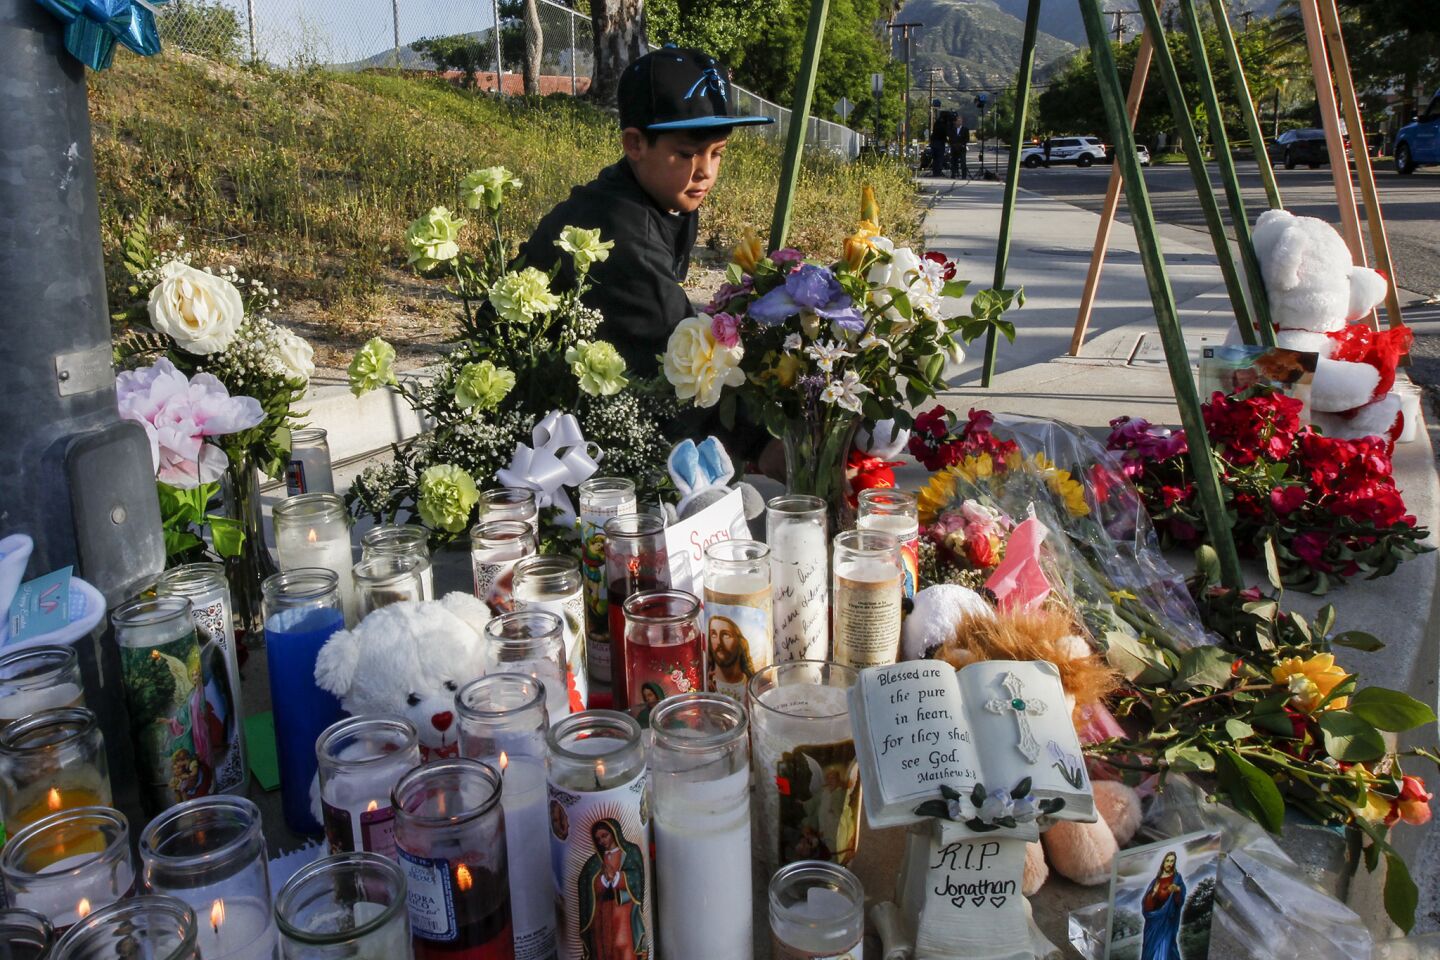 A young boy pays his respects at a makeshift memorial for the shooting victims at North Park Elementary School in San Bernardino.